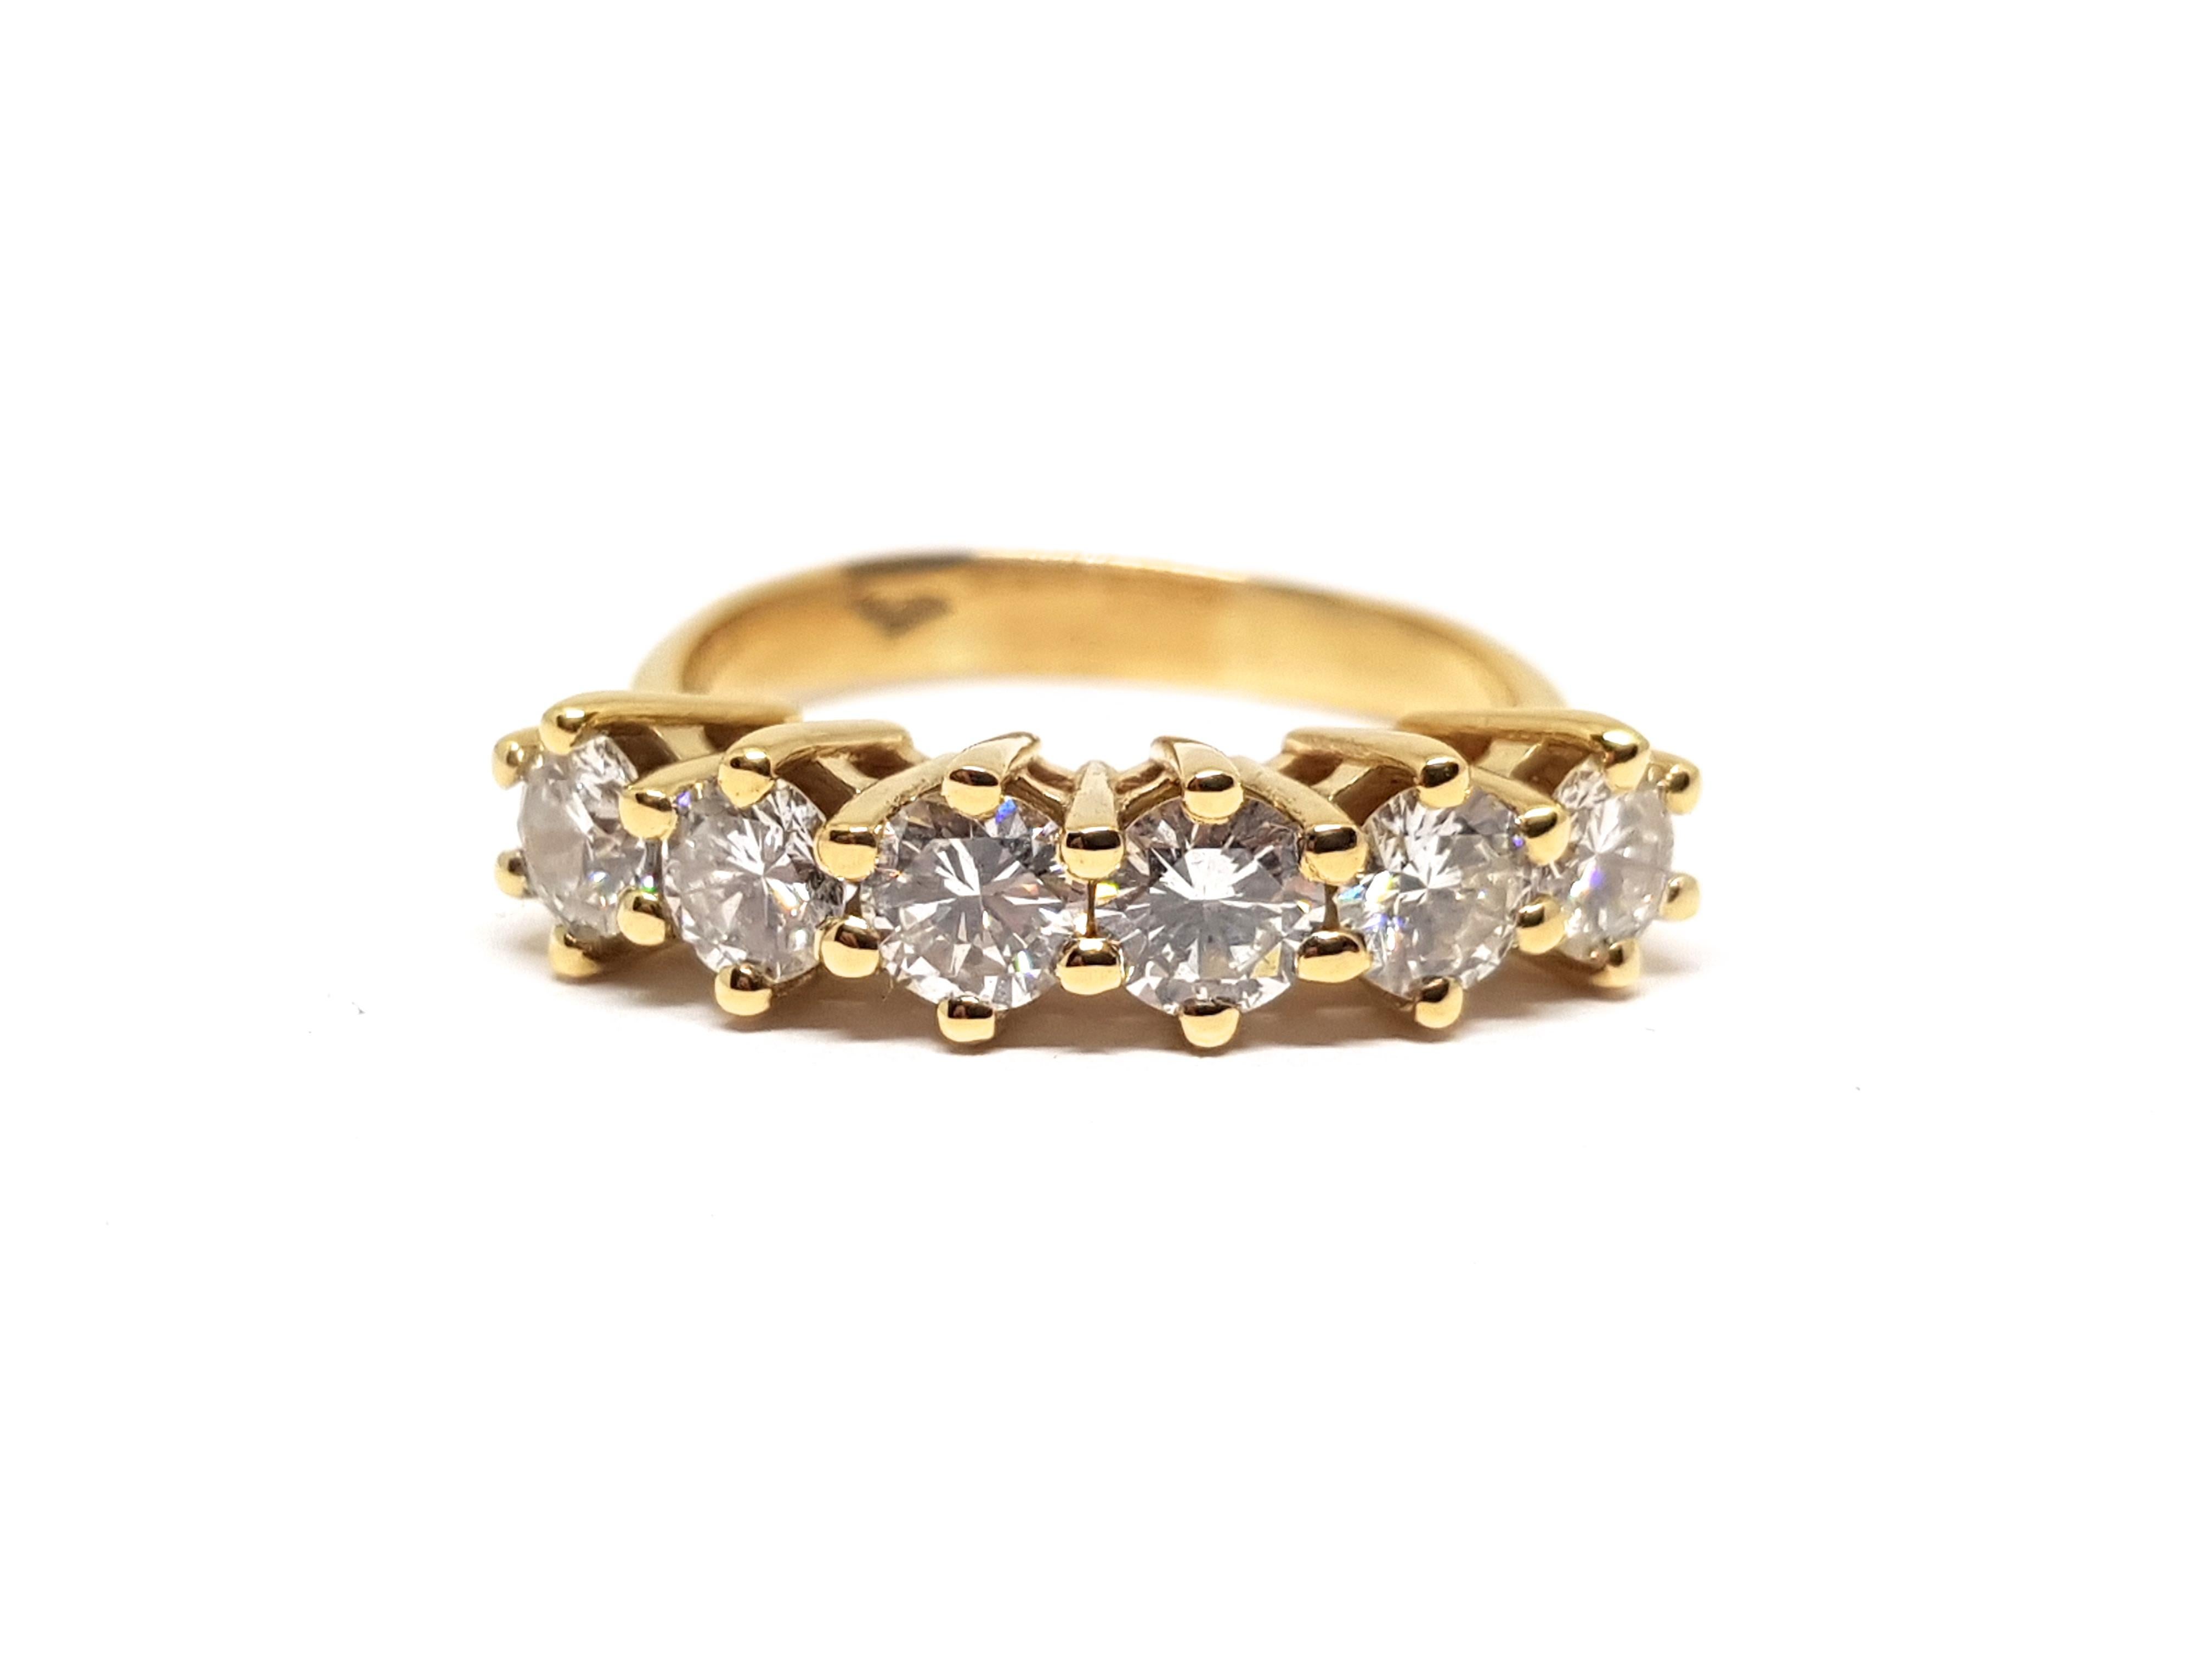 Gold: 18K Yellow Gold. 
Weight: 4.03 gr. 
Diamonds: 1.80ct. F / VS 
Width: 0,53 cm 
Ringsize: 54 / 17,25mm / US 7
Free resizing of ring up to size 70 / 22mm / US 13
Shipping: free worldwide insured shipping 
All of our jewellery is hallmarked and